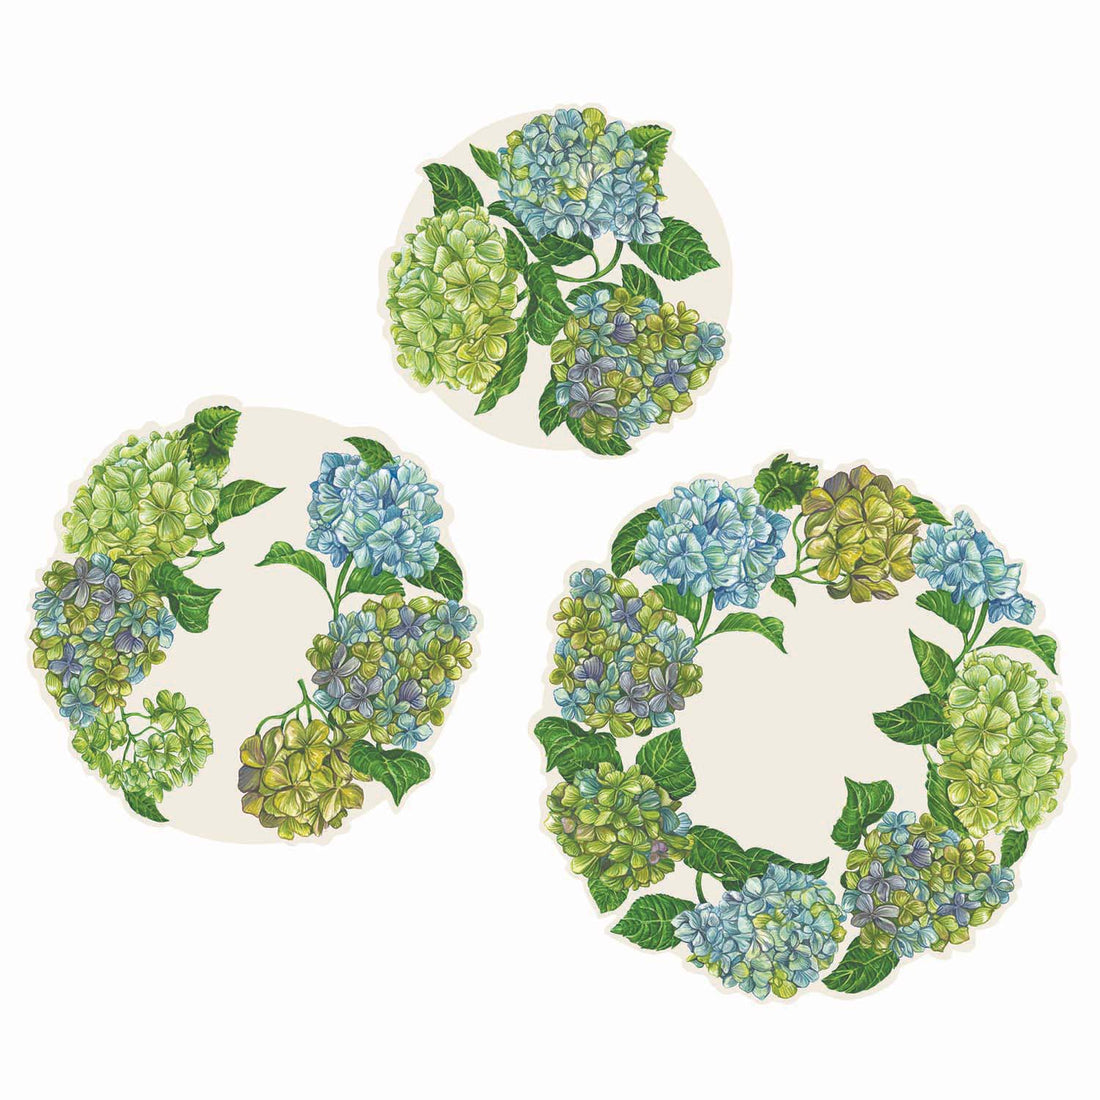 Three different sizes of die-cut Hydrangea Serving Papers featuring blue and green blooms and green leaves. 